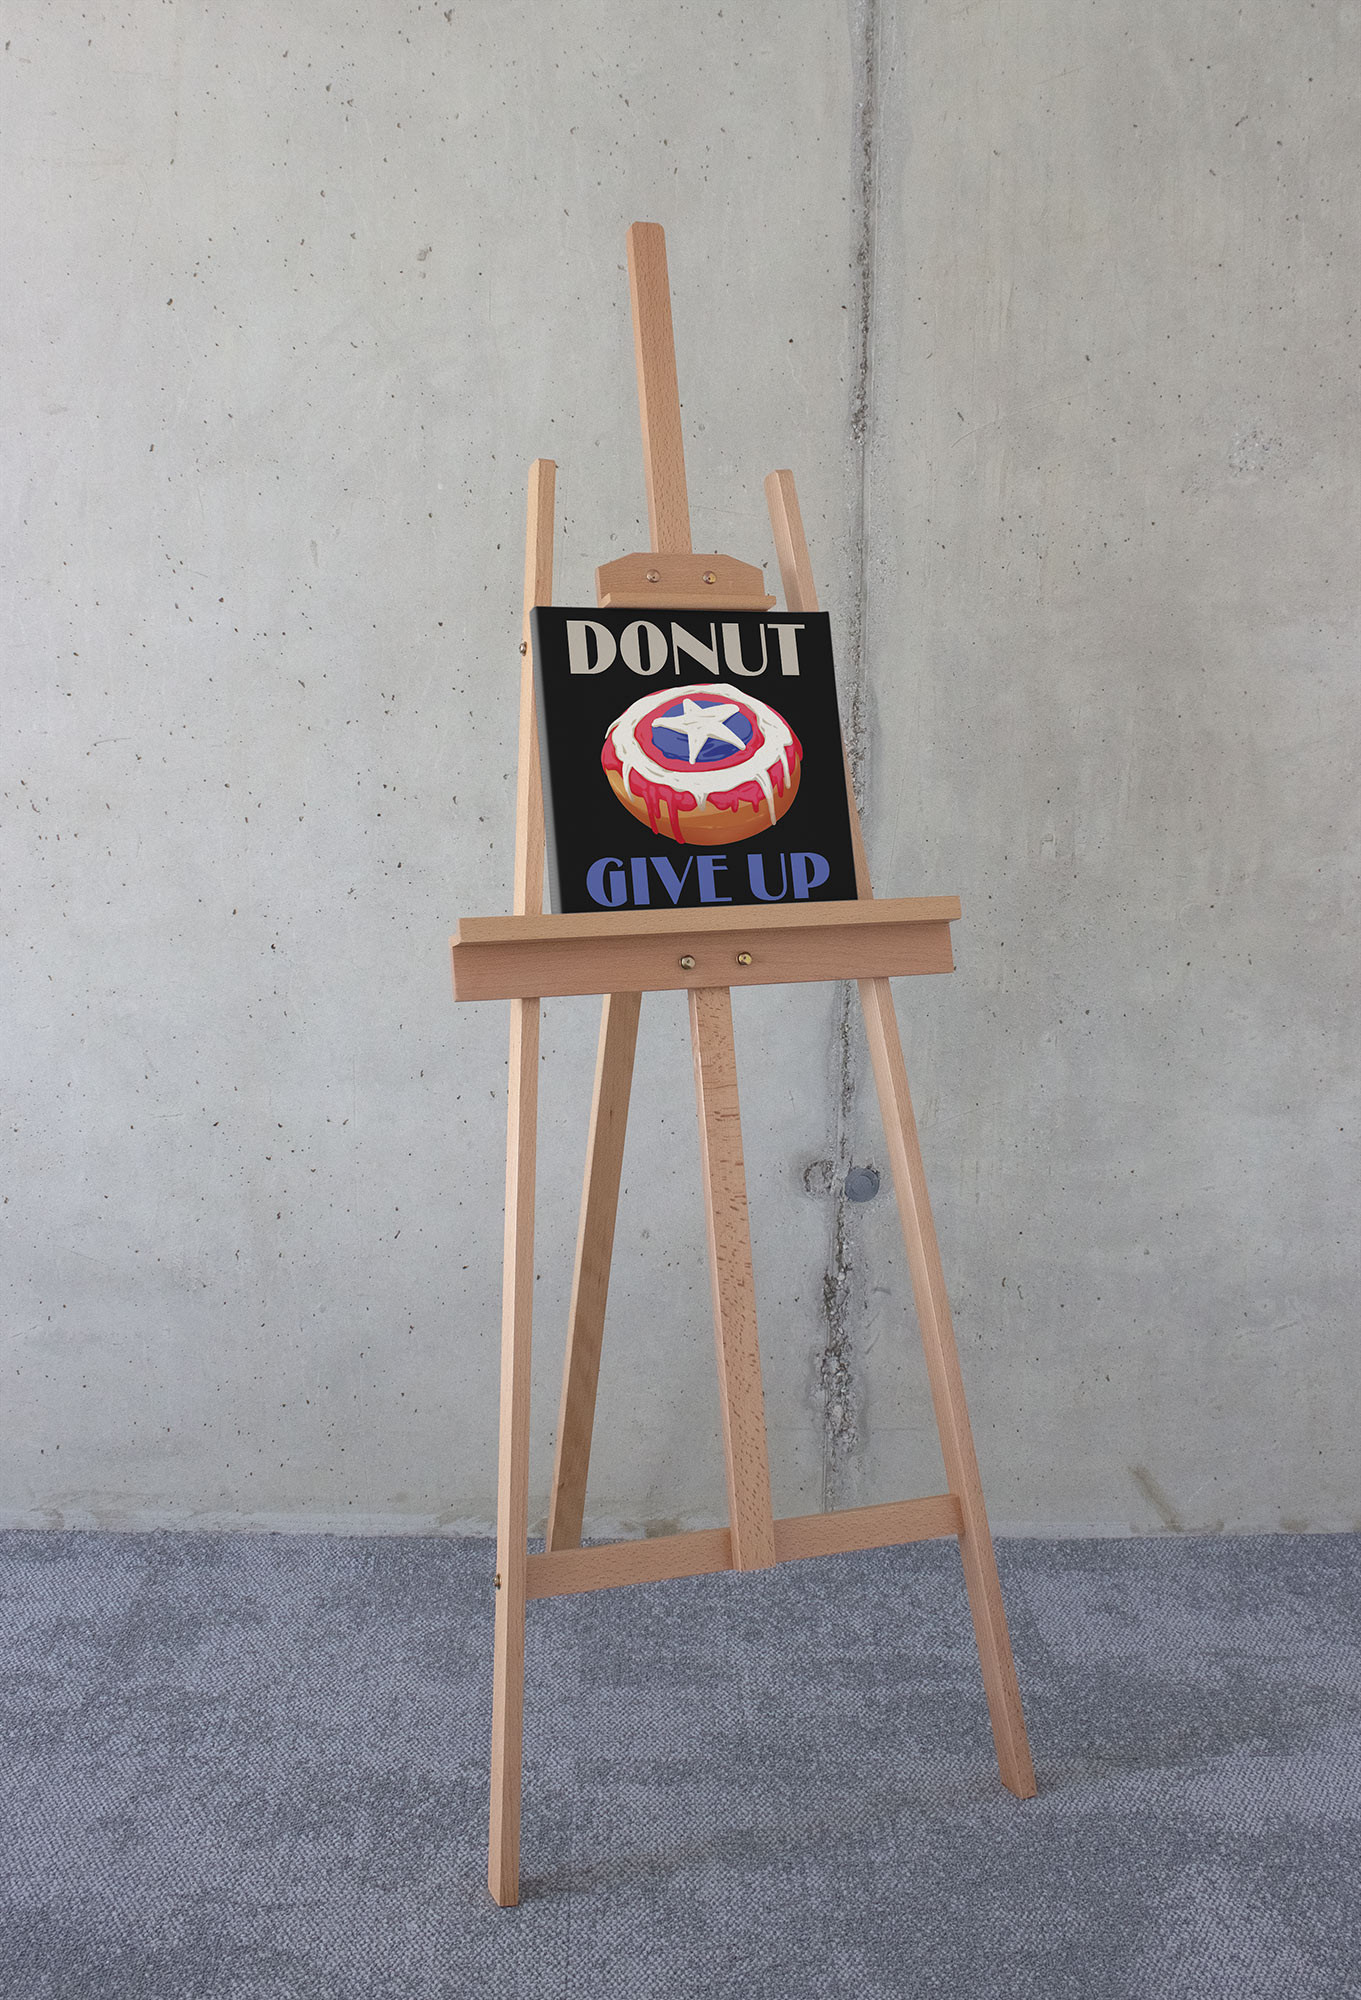 Donut give up